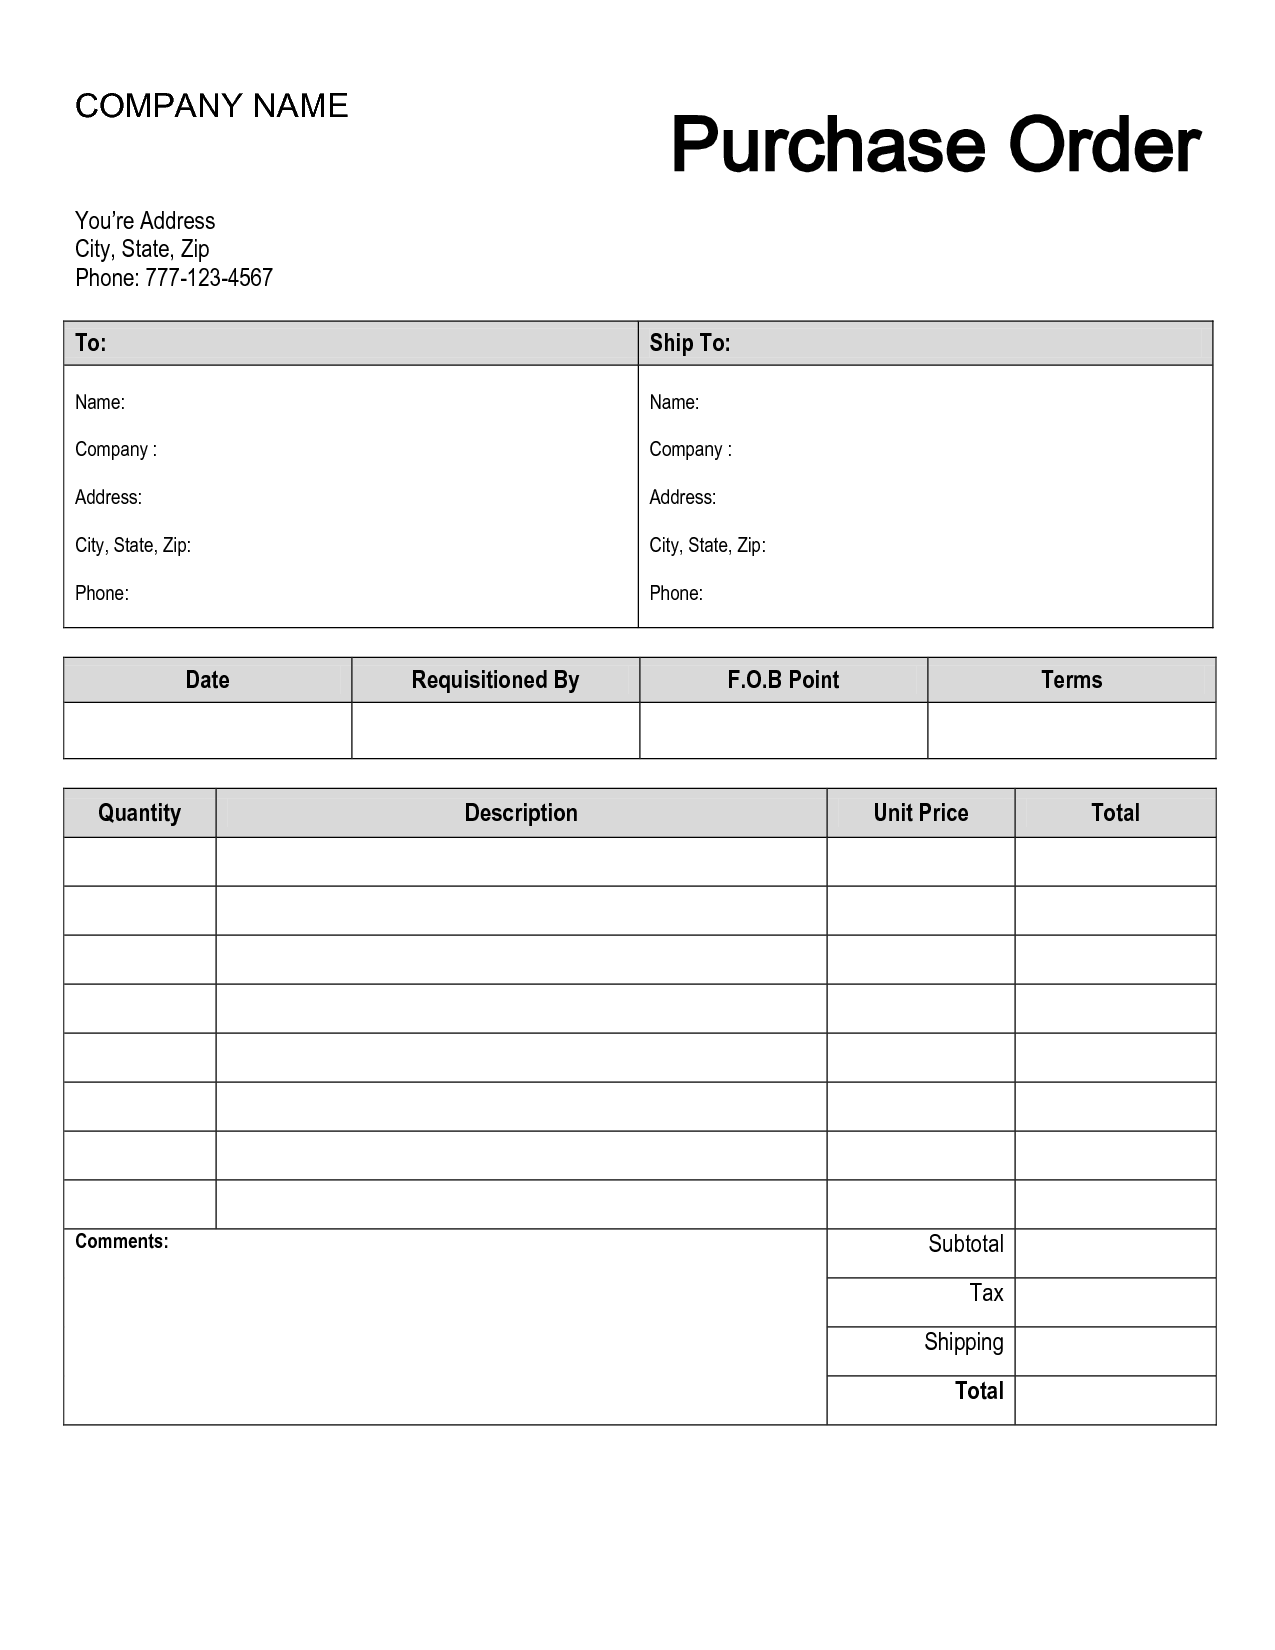 Free Printable Purchase Order Form | Purchase Order | shop 